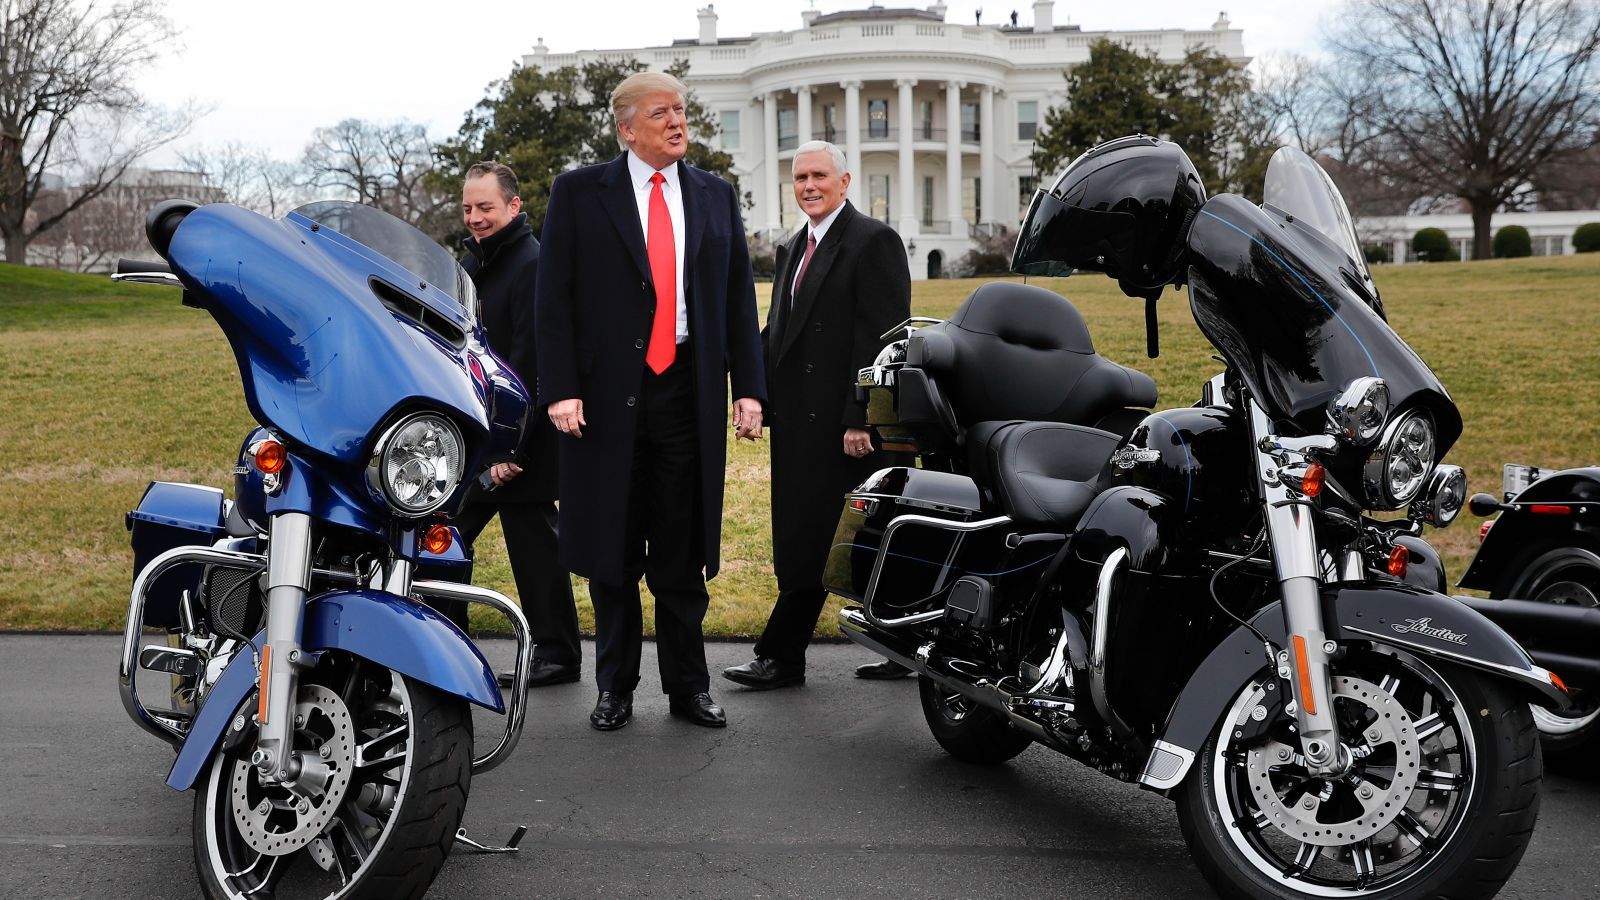 India not doing any favour to US by slashing import duties on motorcycles: Trump